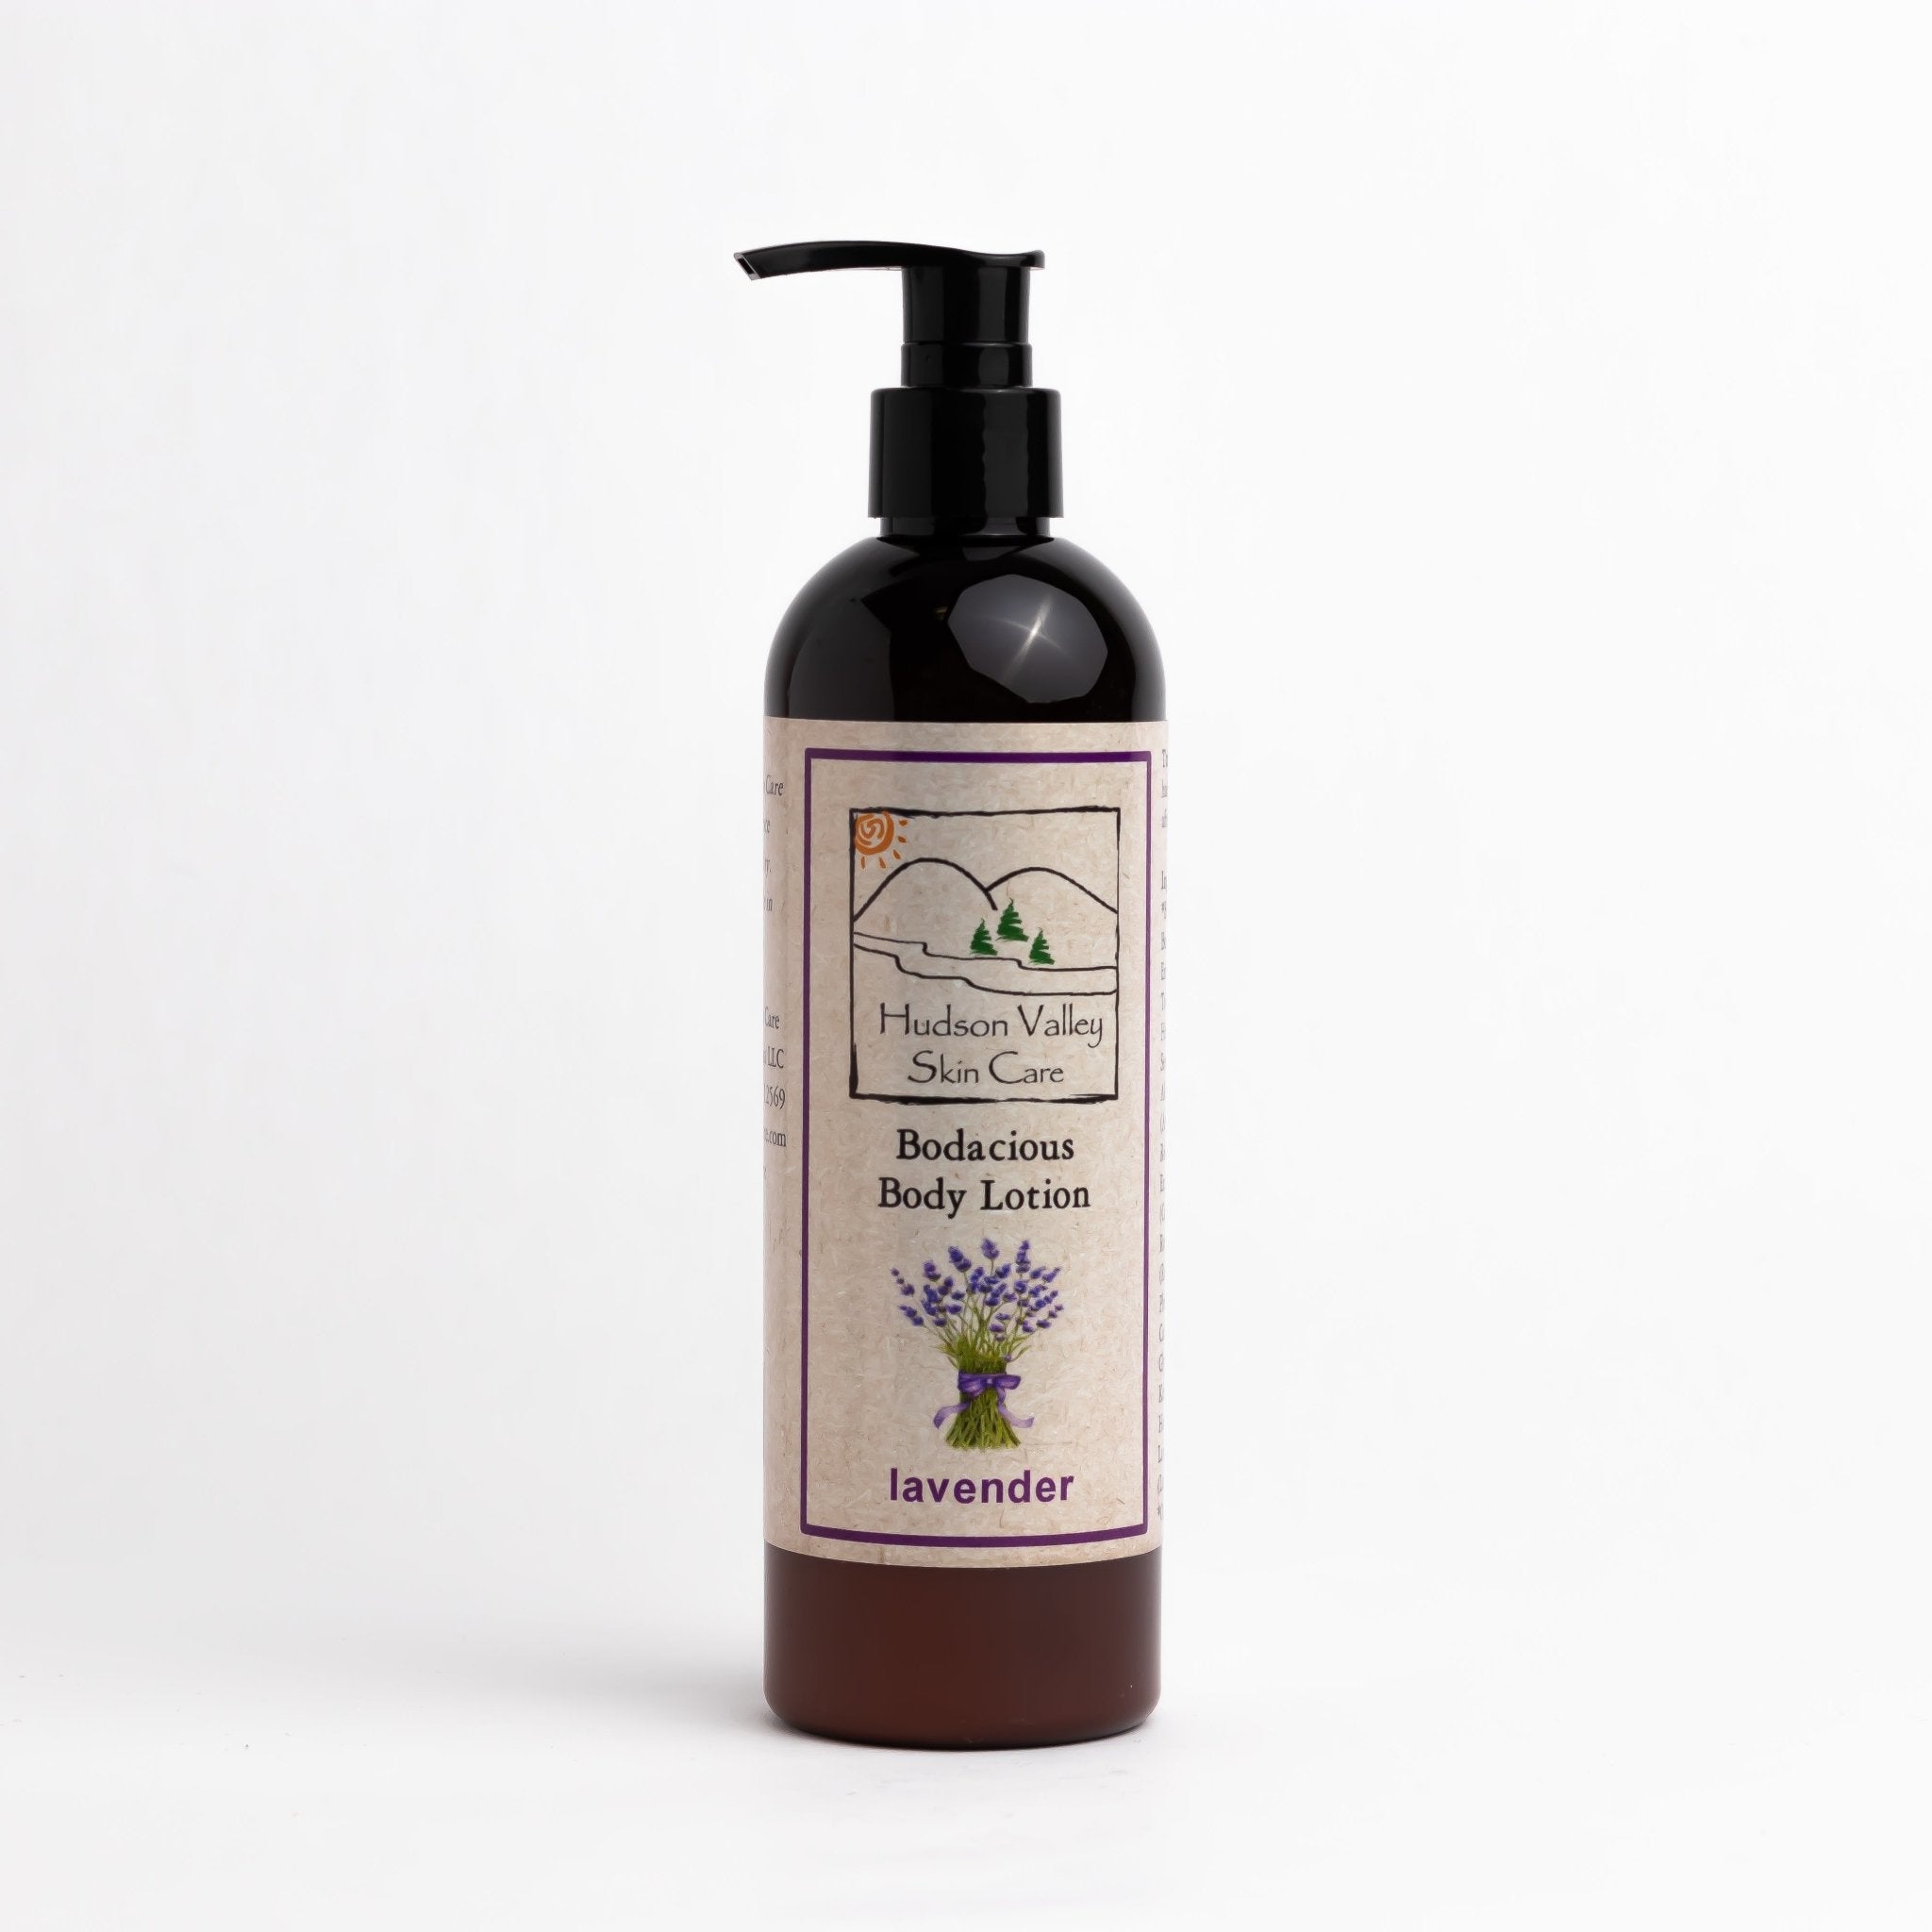 Lavender Bodacious Body Lotion - Hudson Valley Skin Care